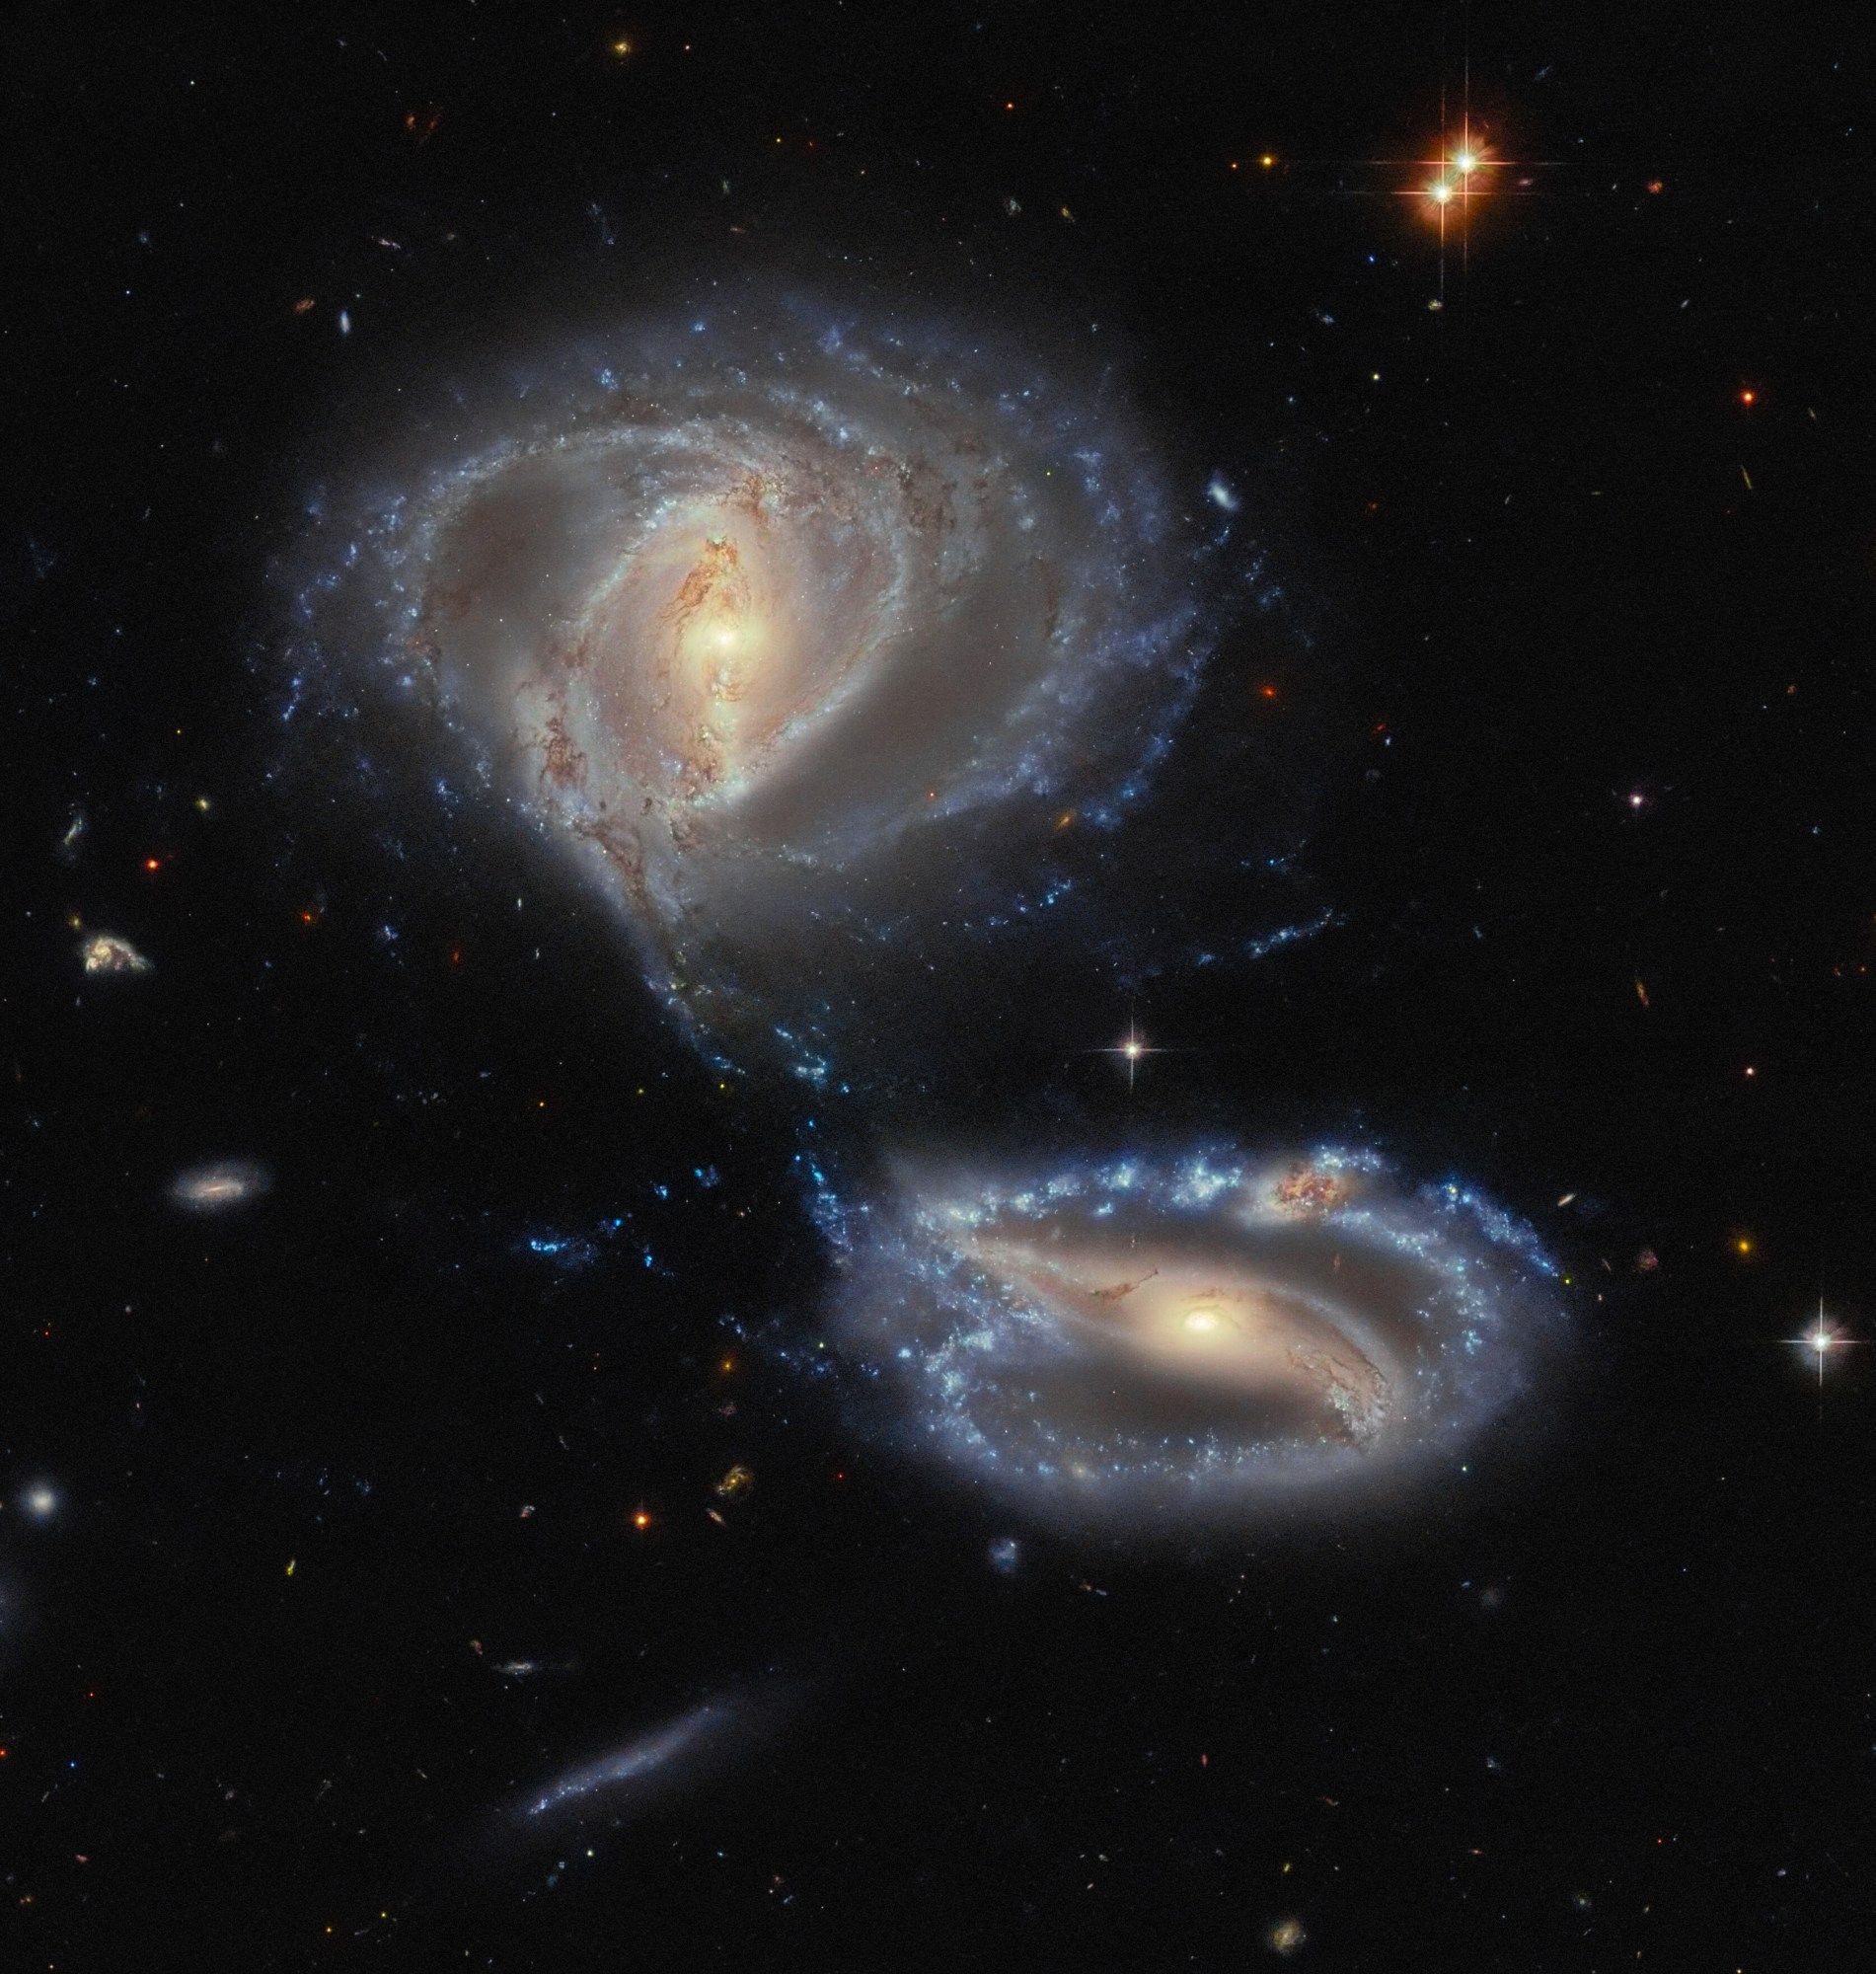 Two spiral galaxies. Each glows brightly in the center, where a bar stretches from side to side. The upper one is rounder, and its arms form two thin rings. The lower galaxy is flatter and its arms make one outer ring; a dusty knot atop its upper arm marks out a third object. Gravity is pulling gas and dust together where the galaxies come close. A number of small galaxies surround them on a black background.